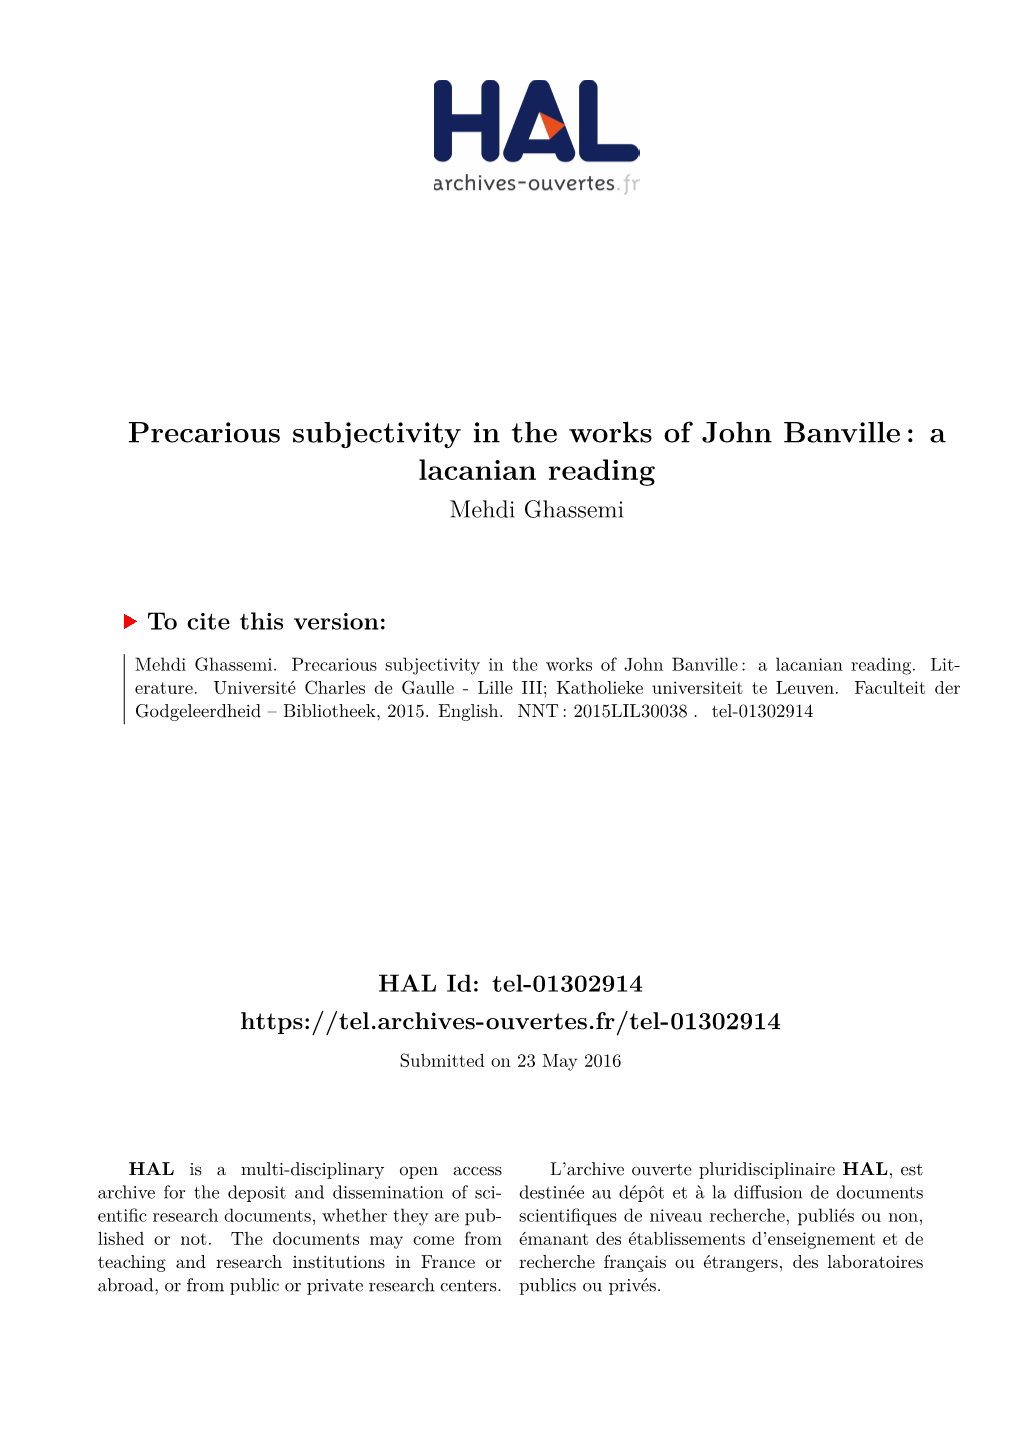 Precarious Subjectivity in the Works of John Banville: a Lacanian Reading